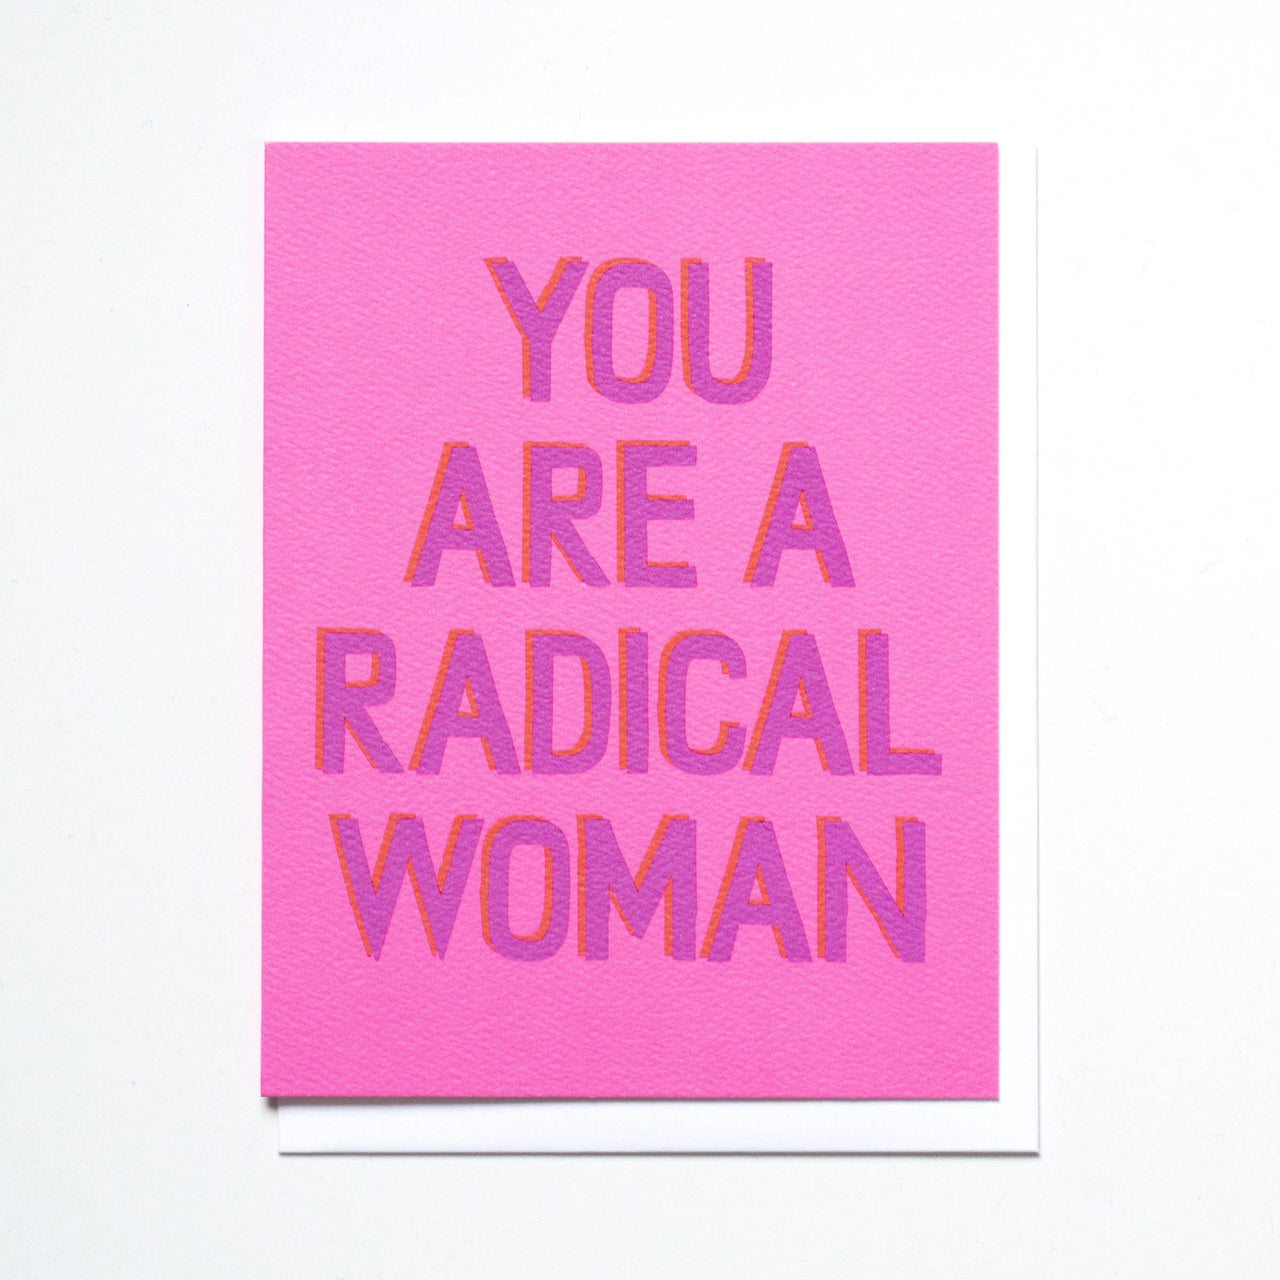 You Are a Radical Woman! Card